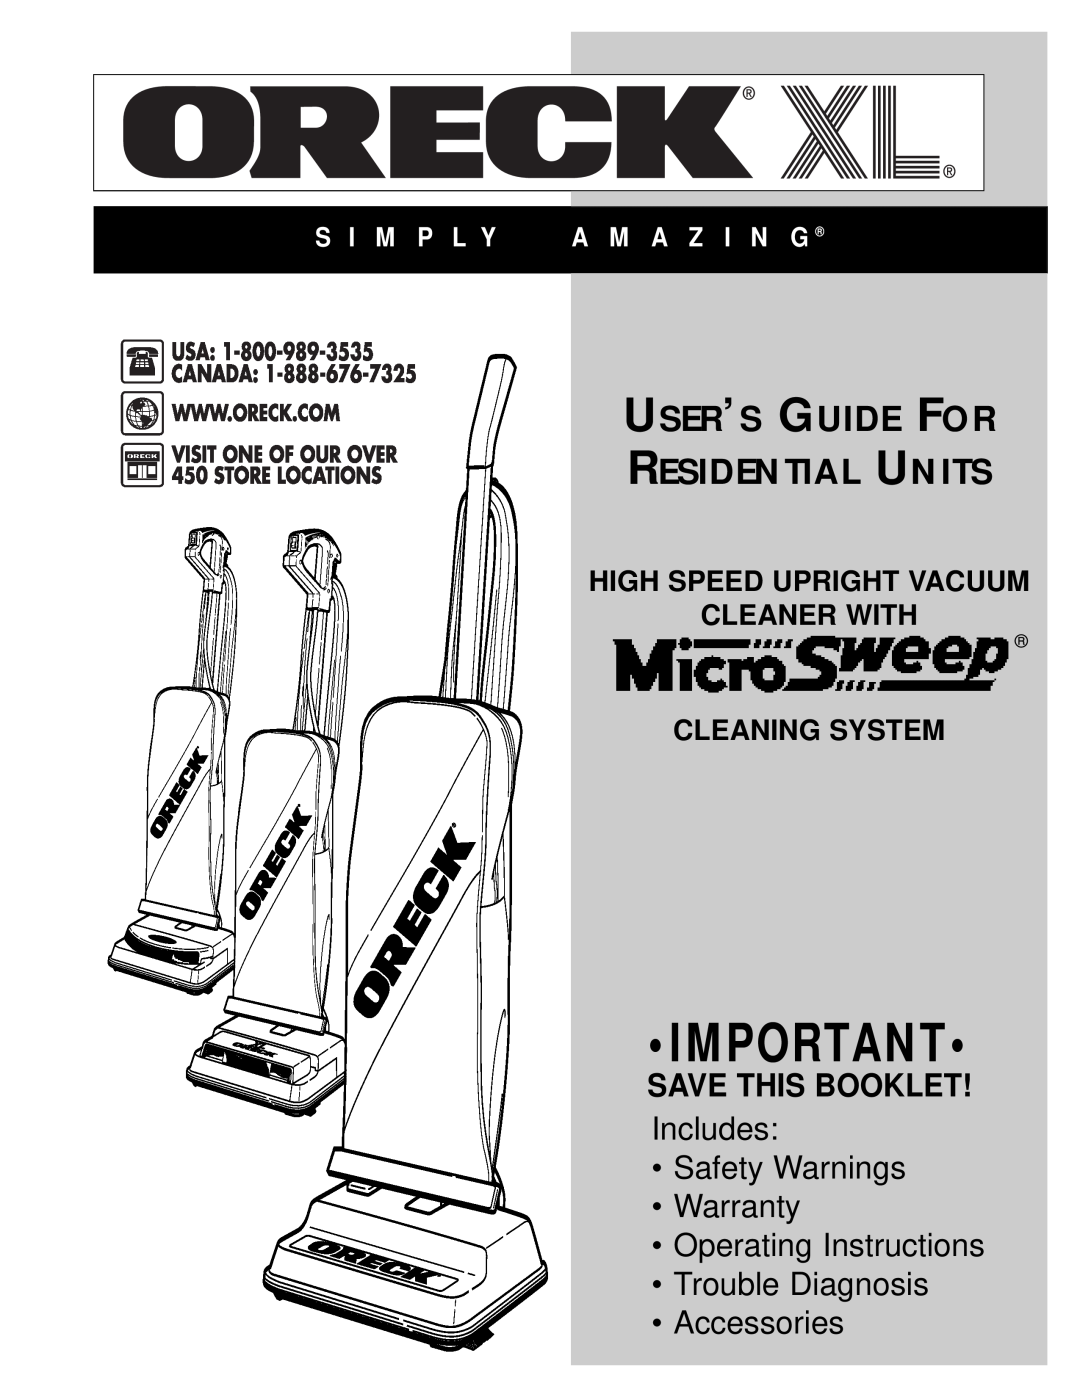 Oreck Upright Bag Vacuum Cleaner warranty Save This Booklet, User’S Guide For Residential Units, Accessories, S I M P L Y 